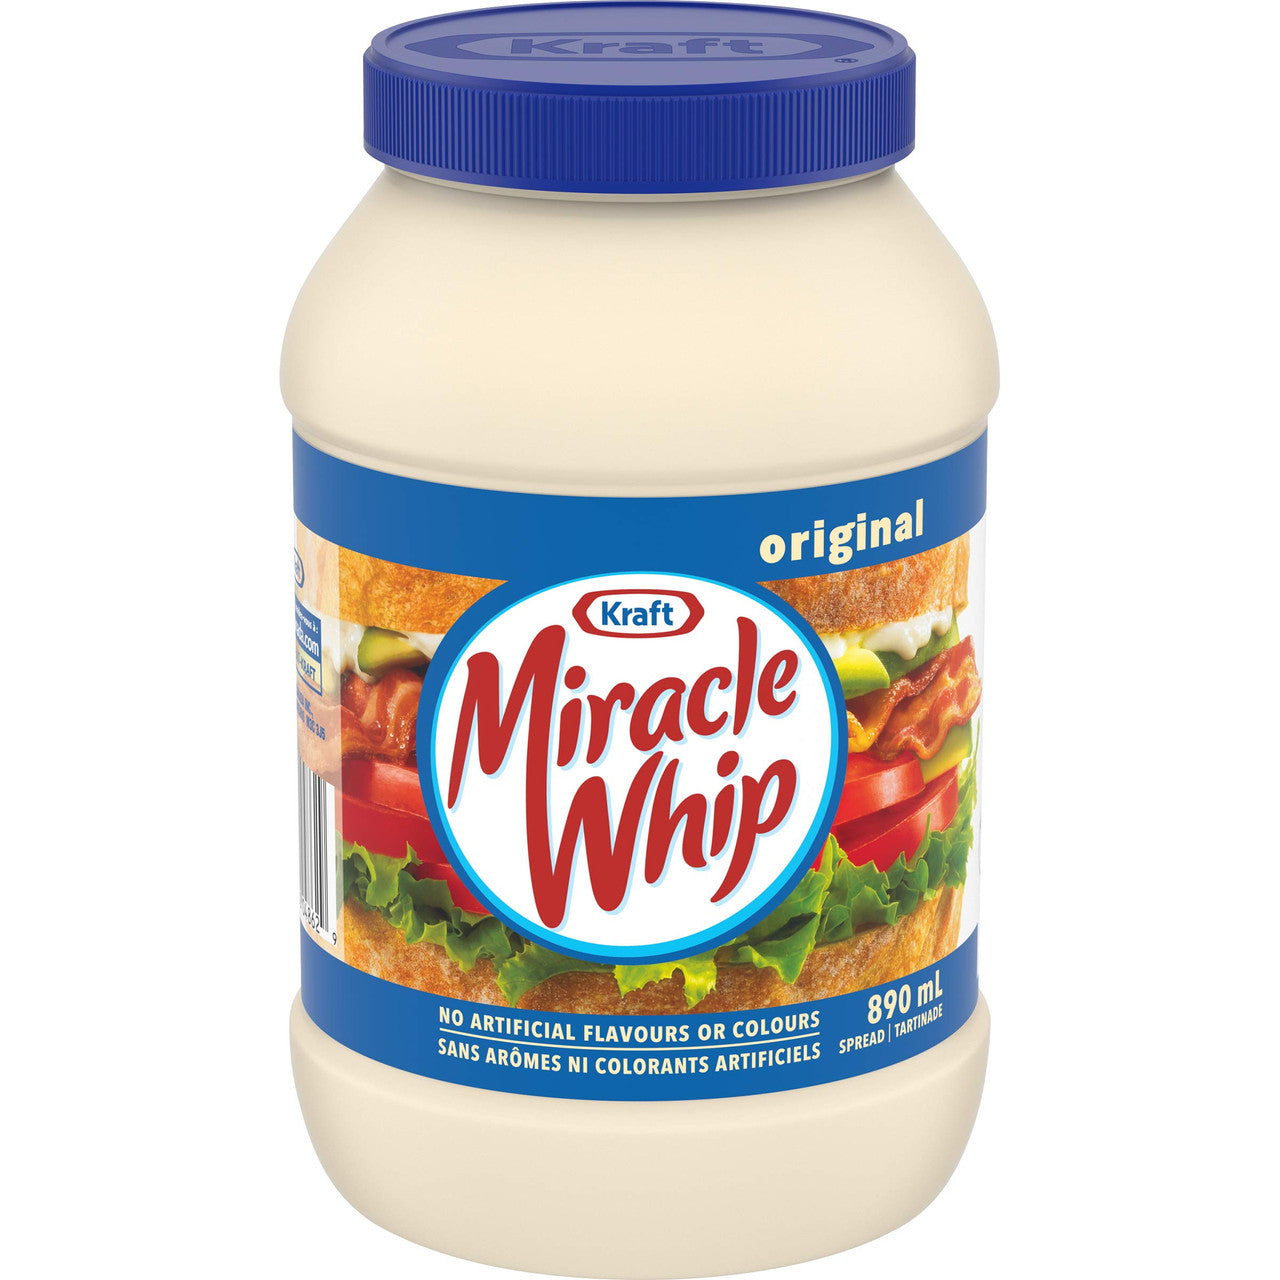 Kraft Miracle Whip Original Dressing, 890mL/30.1 fl. oz., {Imported from Canada}